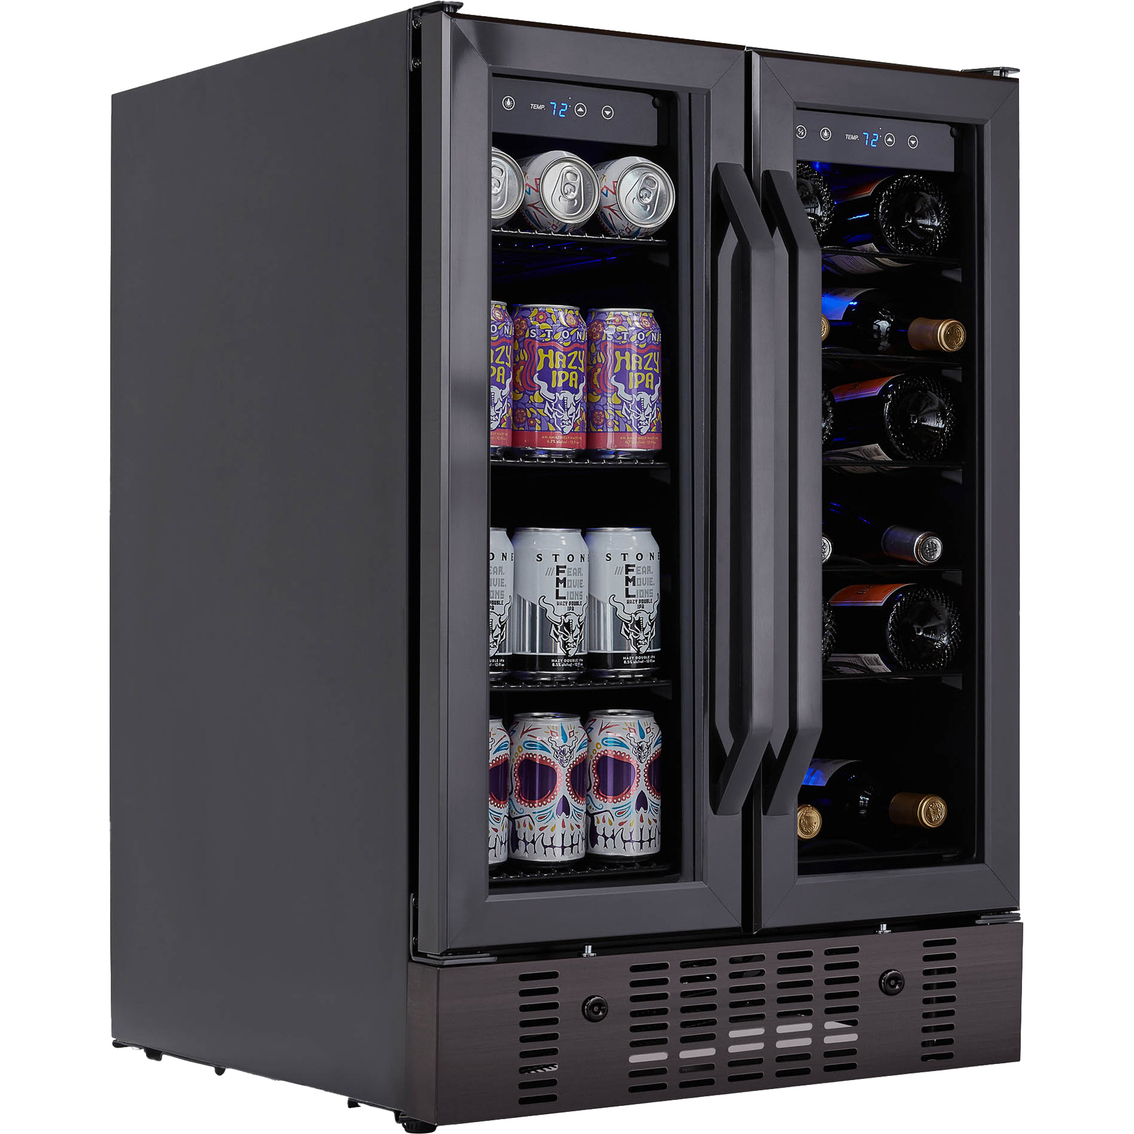 Newair 24 in. Built in Dual Zone Wine and Beverage Refrigerator and Cooler - Image 2 of 10